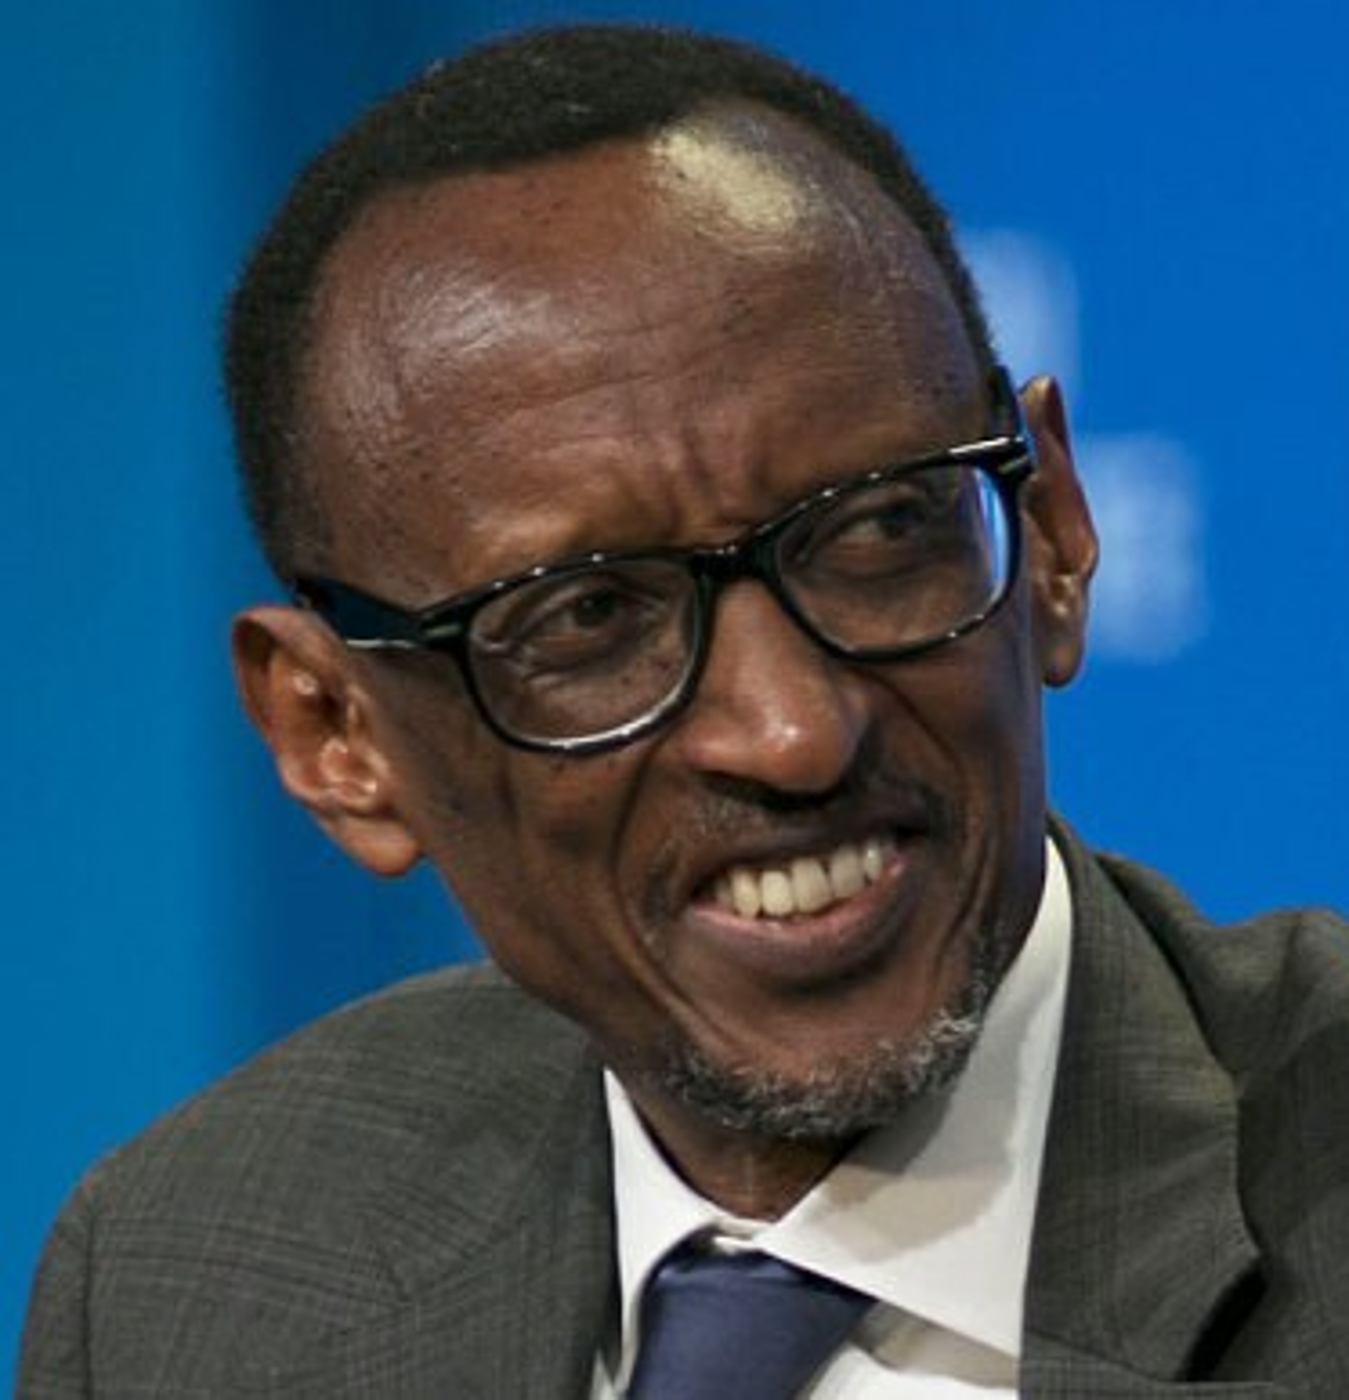 President of Rwanda Paul Kagame (Tutsi). Among the Tutsi-Hima, individuals with a more Cushitic-influenced physiognomy can occasionally be found; more often in their ruling class than among commoners. However, this foreign influence is limited to anthropometric traits and never includes attributes such as non-kinky hair texture. This suggests that the Tutsi-Hima's ancestors were Bantus who absorbed some Cushitic peoples rather than vice versa.